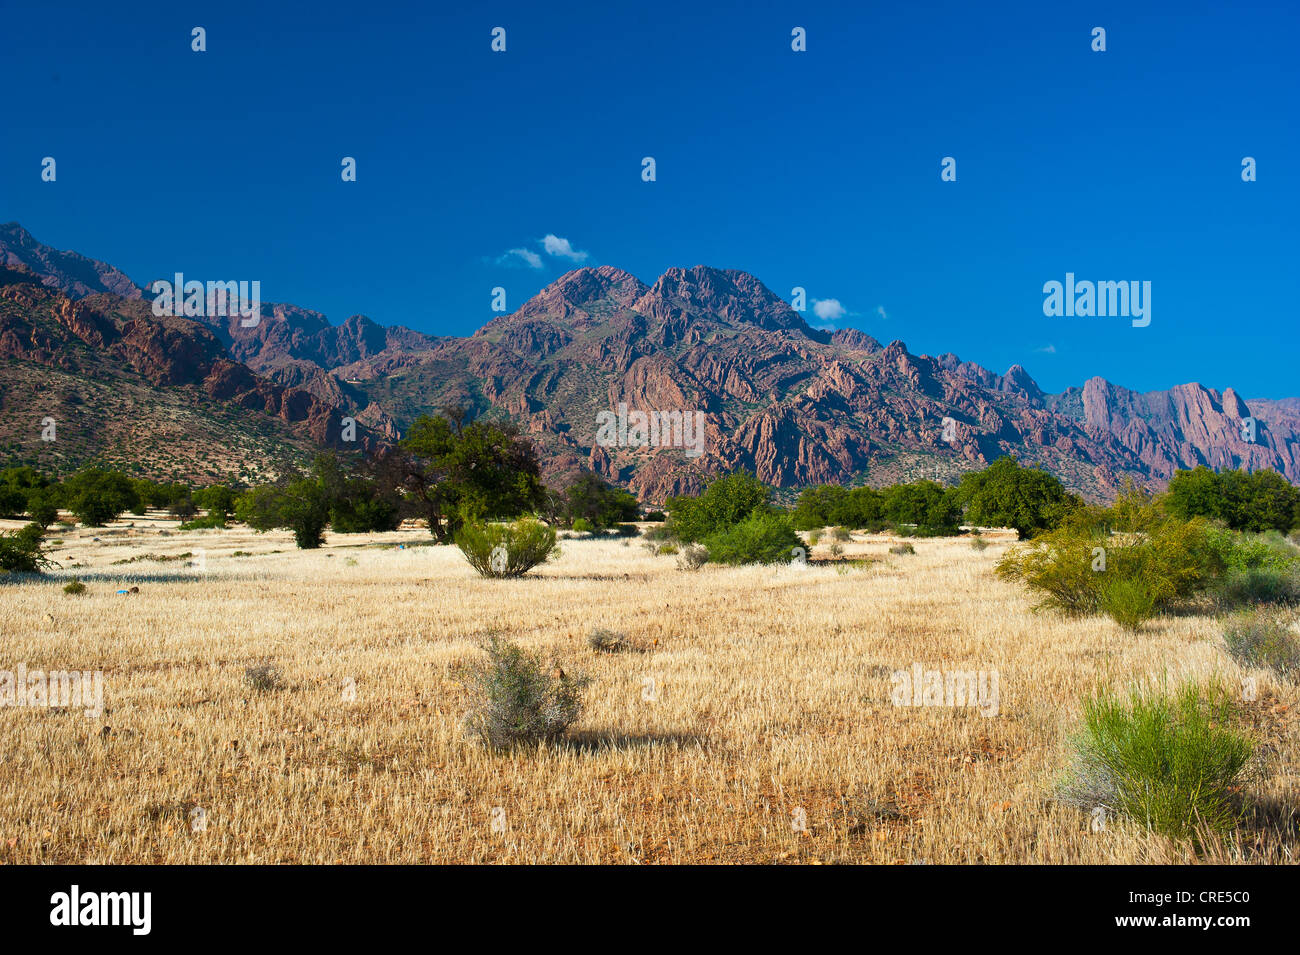 Typical mountain landscape with Argan Trees (Argania spinosa), Anti-Atlas Mountains, Valley of the Ammeln, southern Morocco Stock Photo